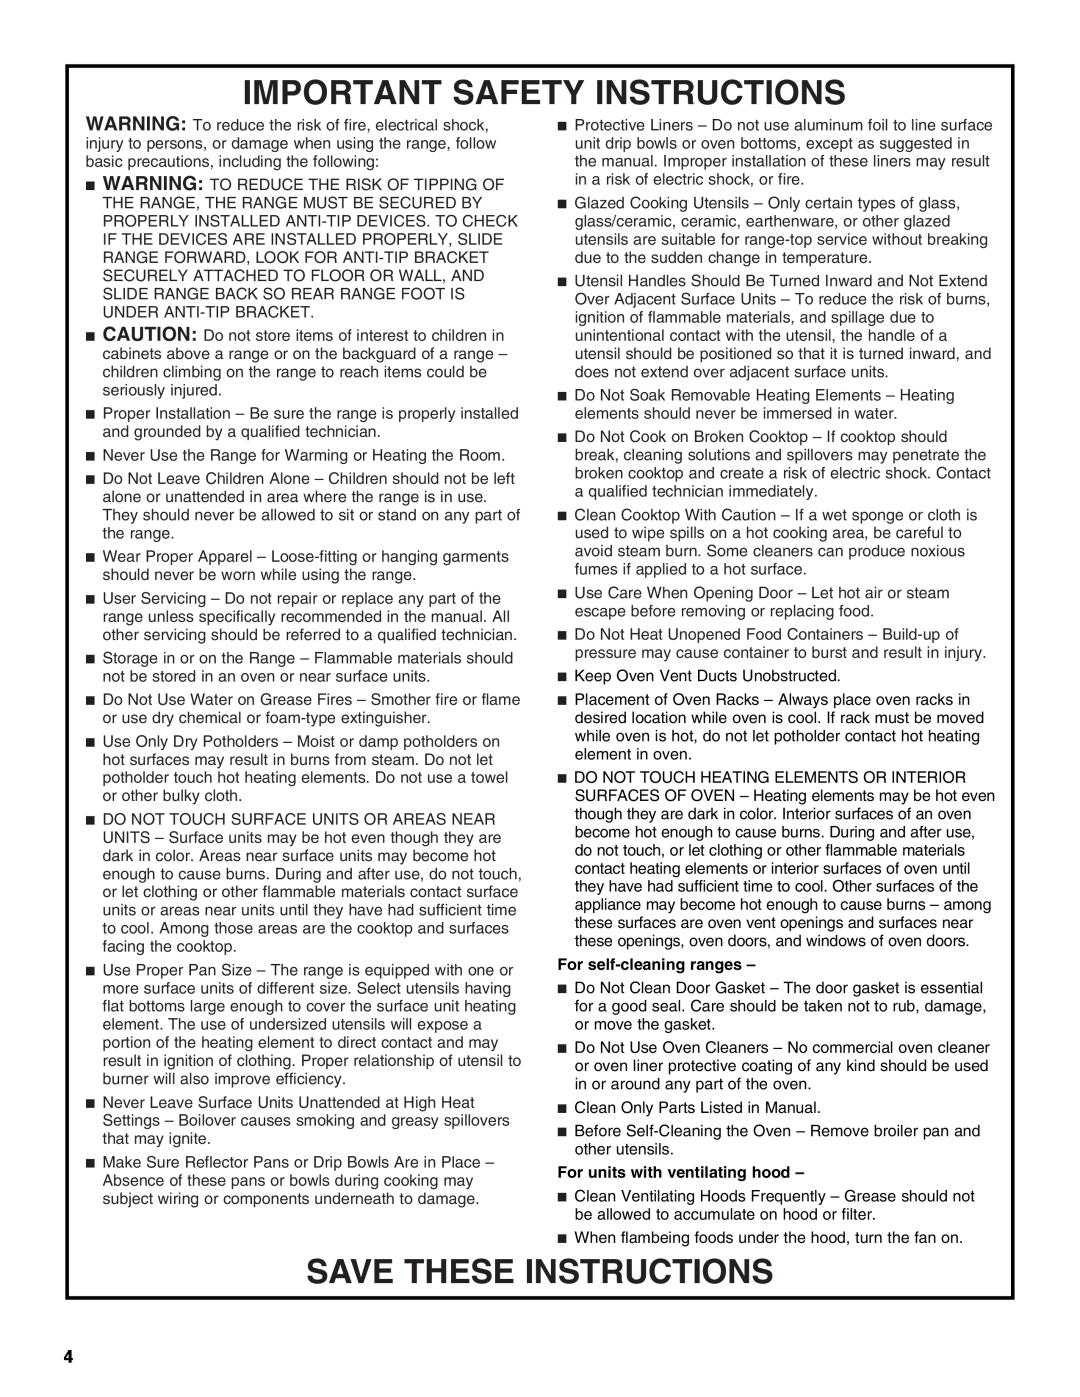 Whirlpool GY397LXUB, GY399LXUQ, GY399LXUS Important Safety Instructions, Save These Instructions, For self-cleaning ranges 